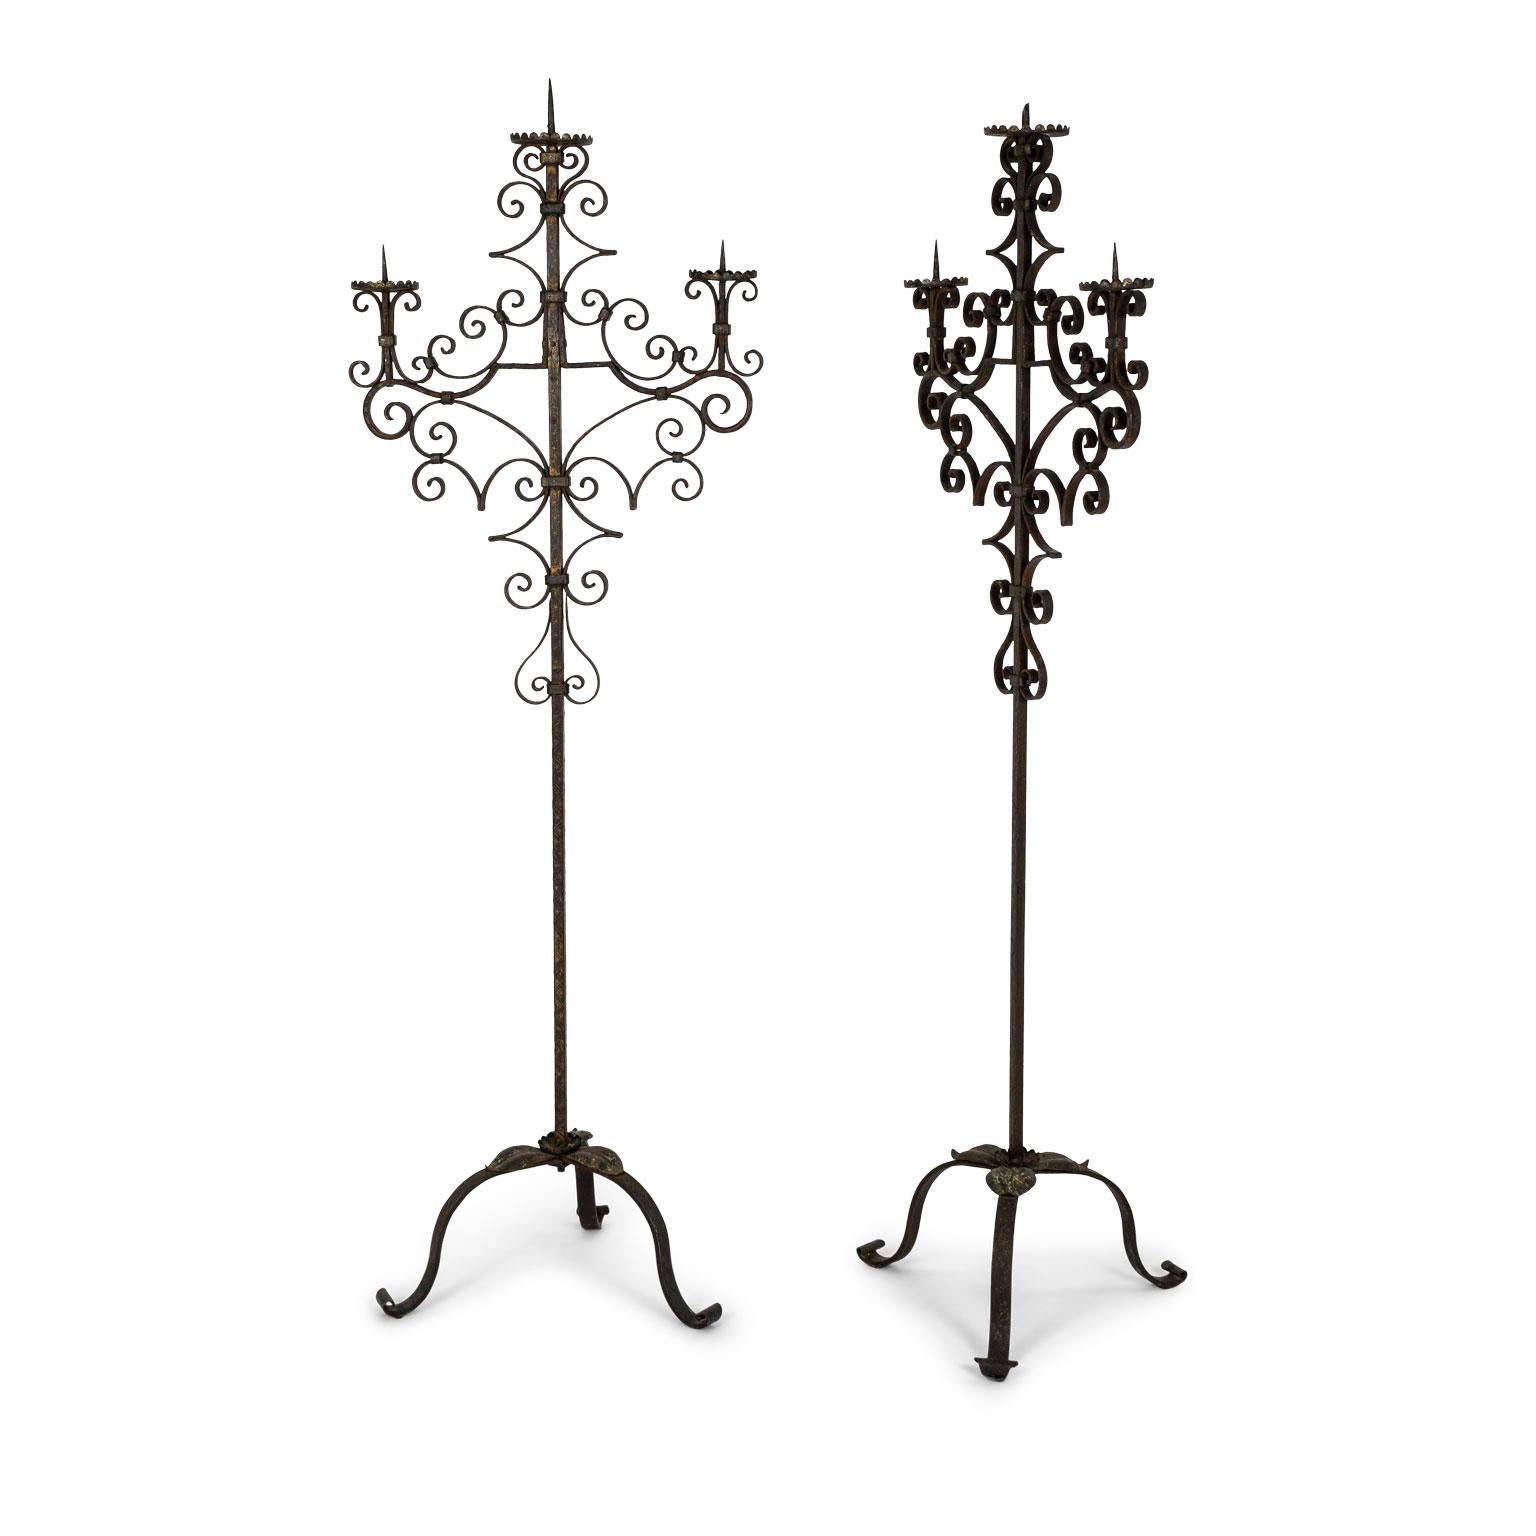 Standing wrought iron standing candelabrum from France, circa 1920-1940. Sold separately and priced $1,700 each.